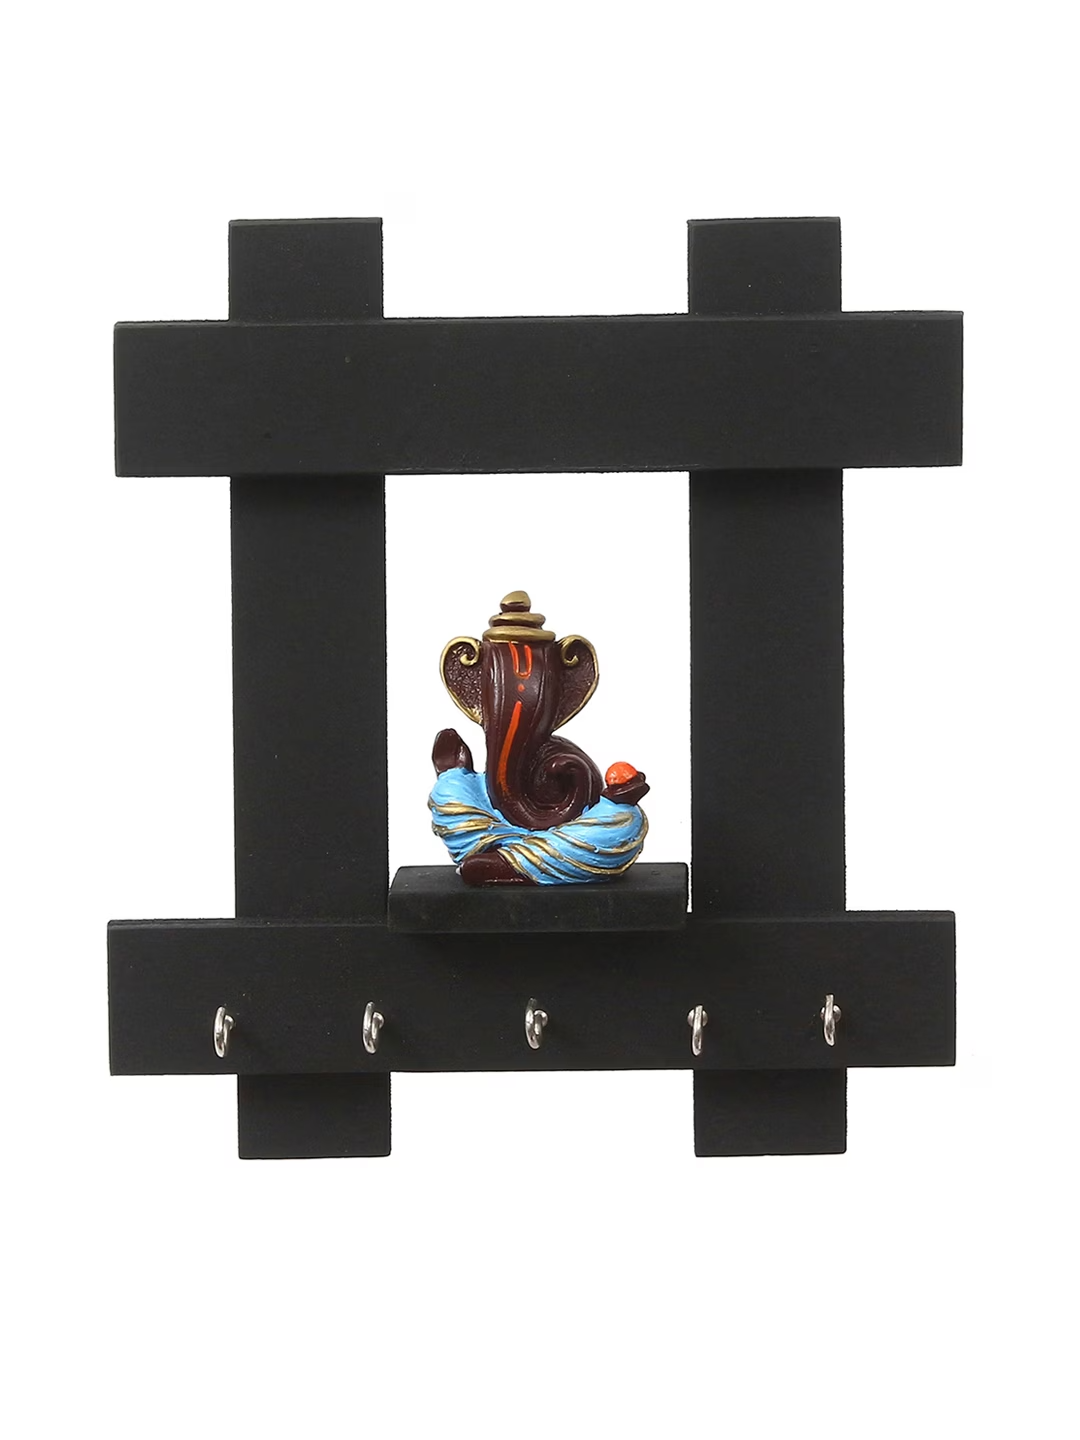 Black & Brown Lord Ganesha Wooden Key Holder With 5 Key Knobs